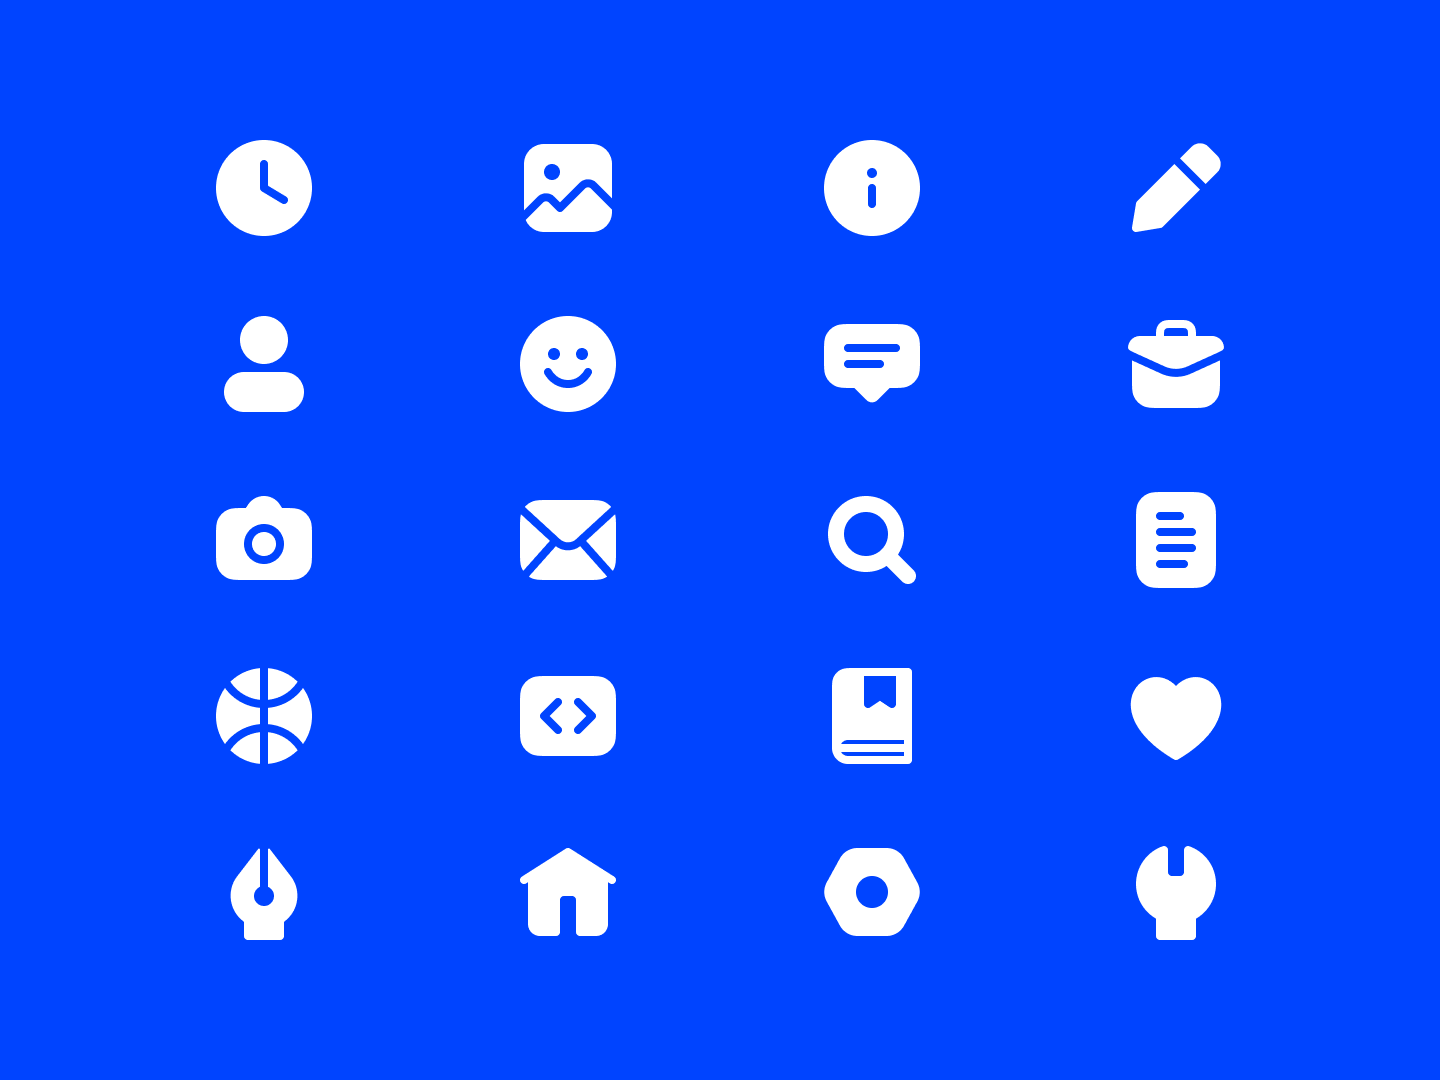 The filled version of my website icons